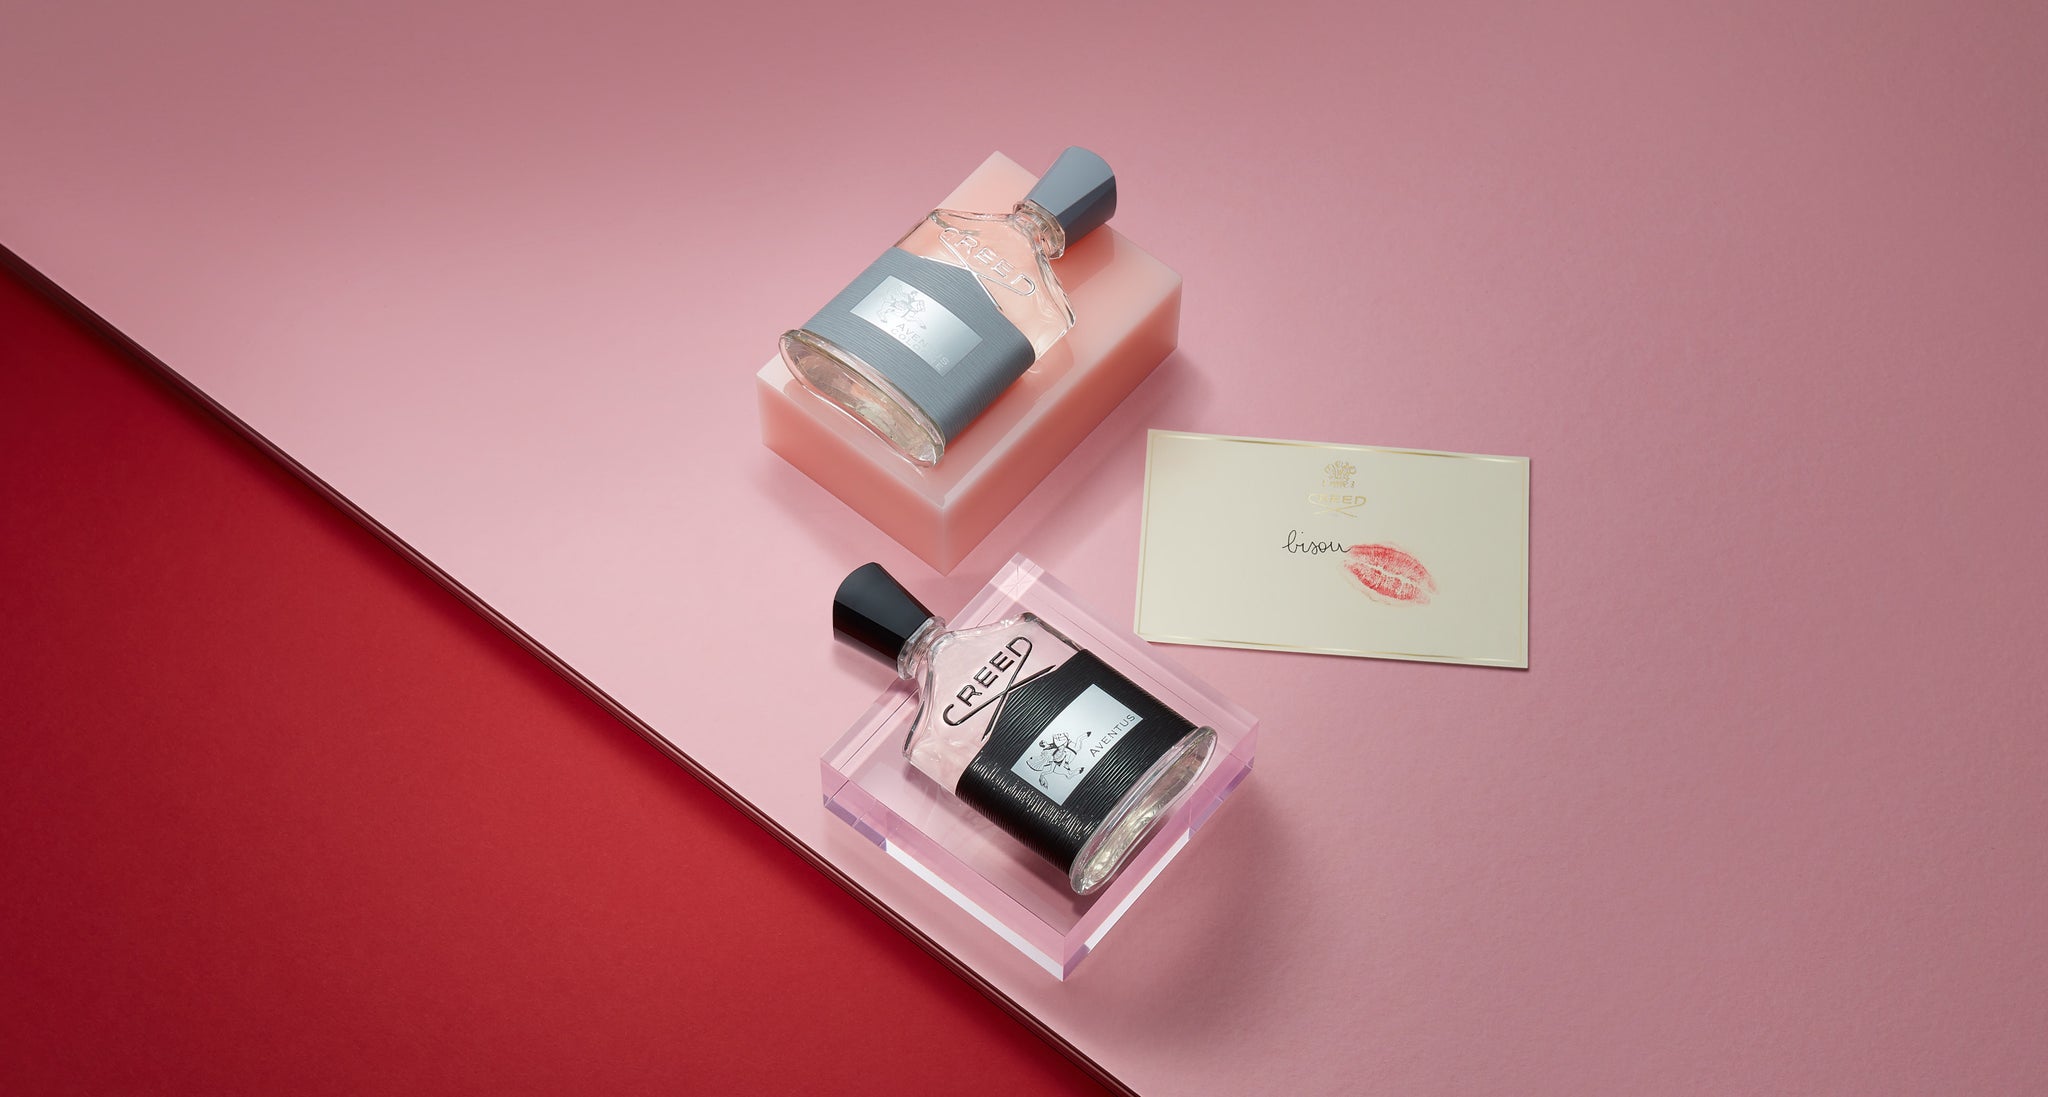 Aventus & Aventus Cologne Bottles with Valentine's Day Card on the side